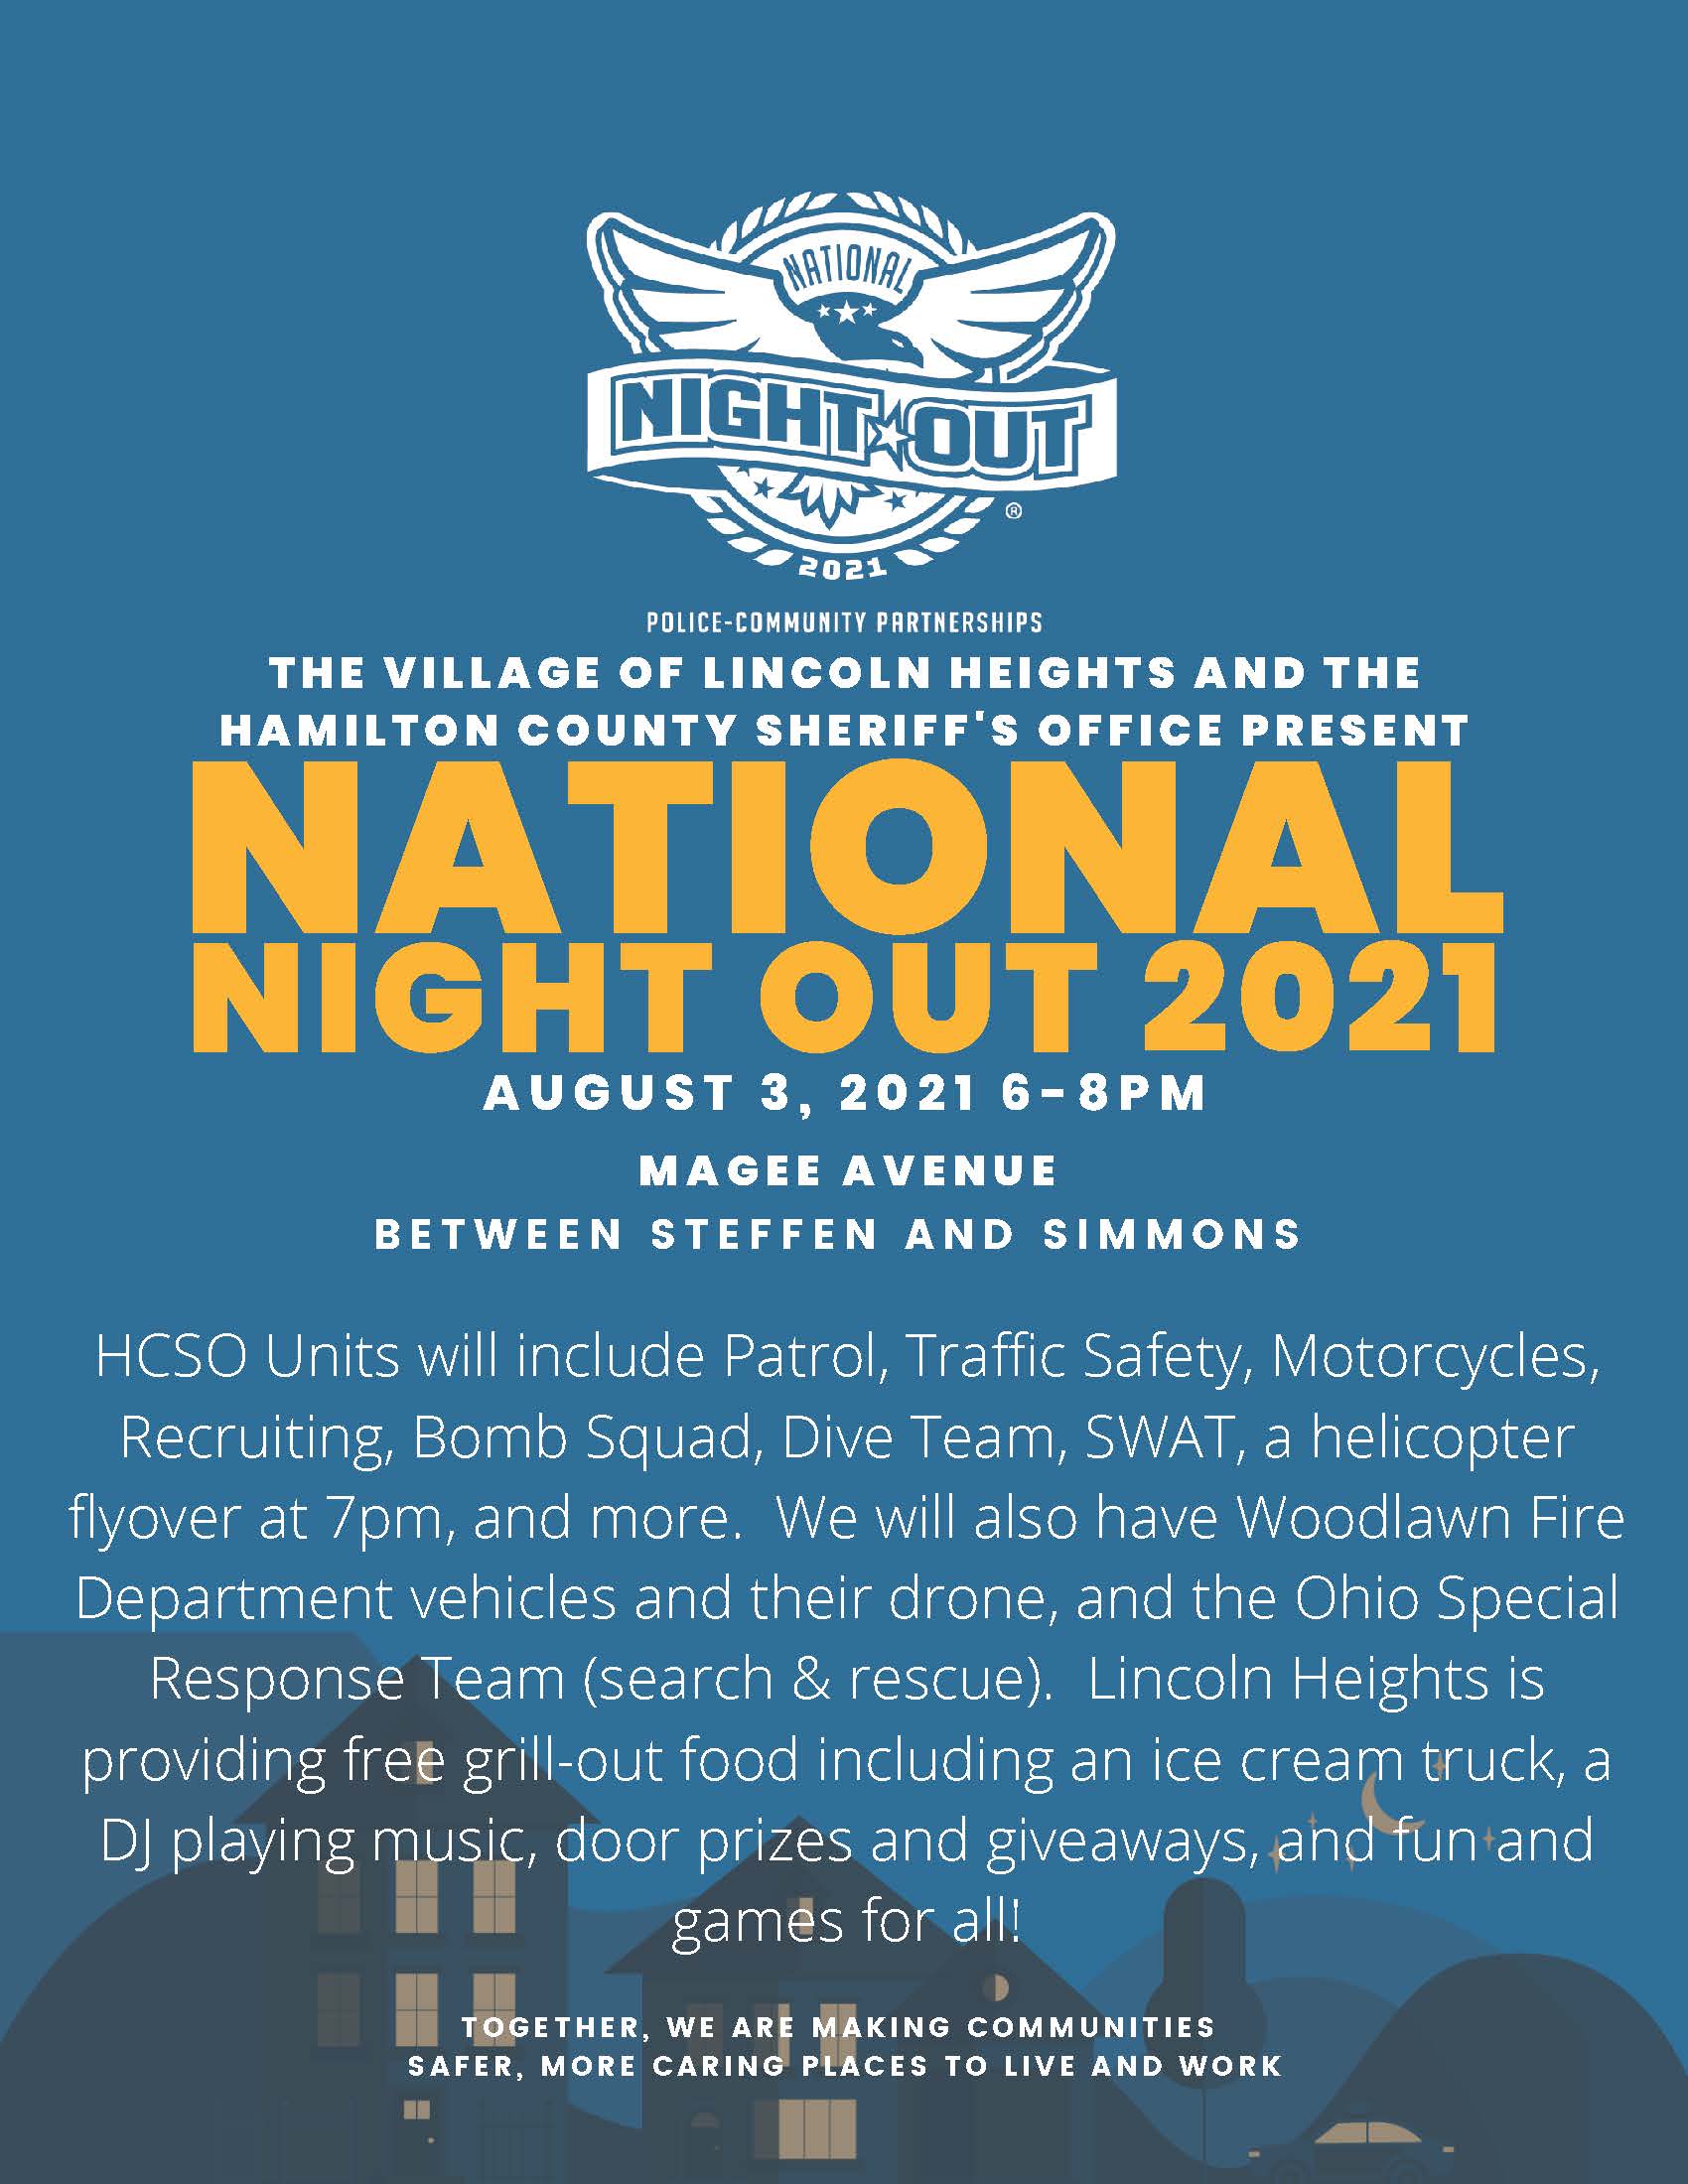 National Night Out Poster-Updated 7-23-21